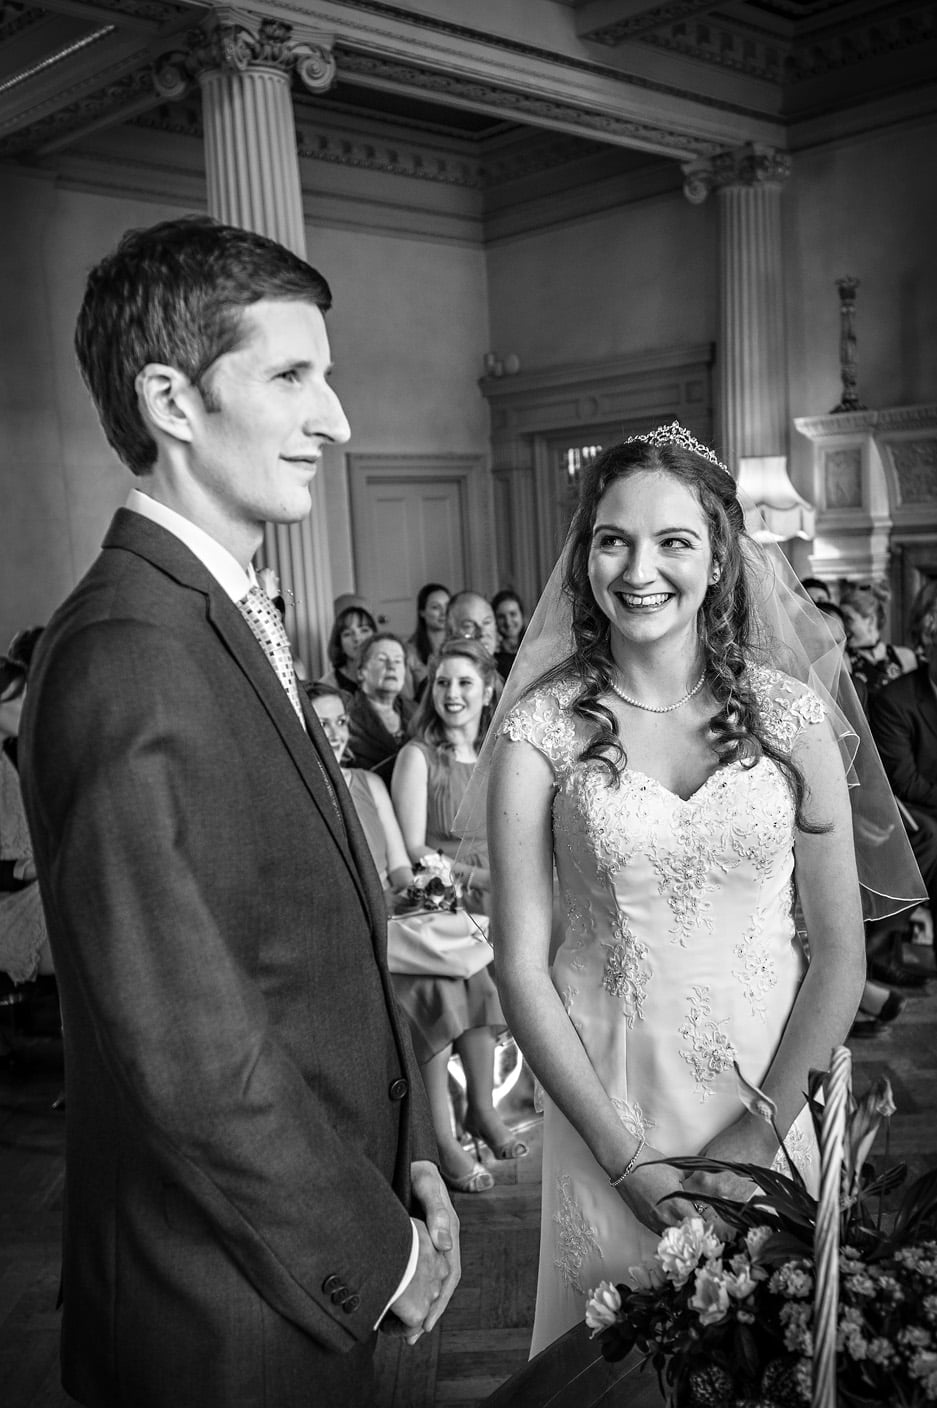 The bride laughing with groom at Hampton Court House wedding ceremony